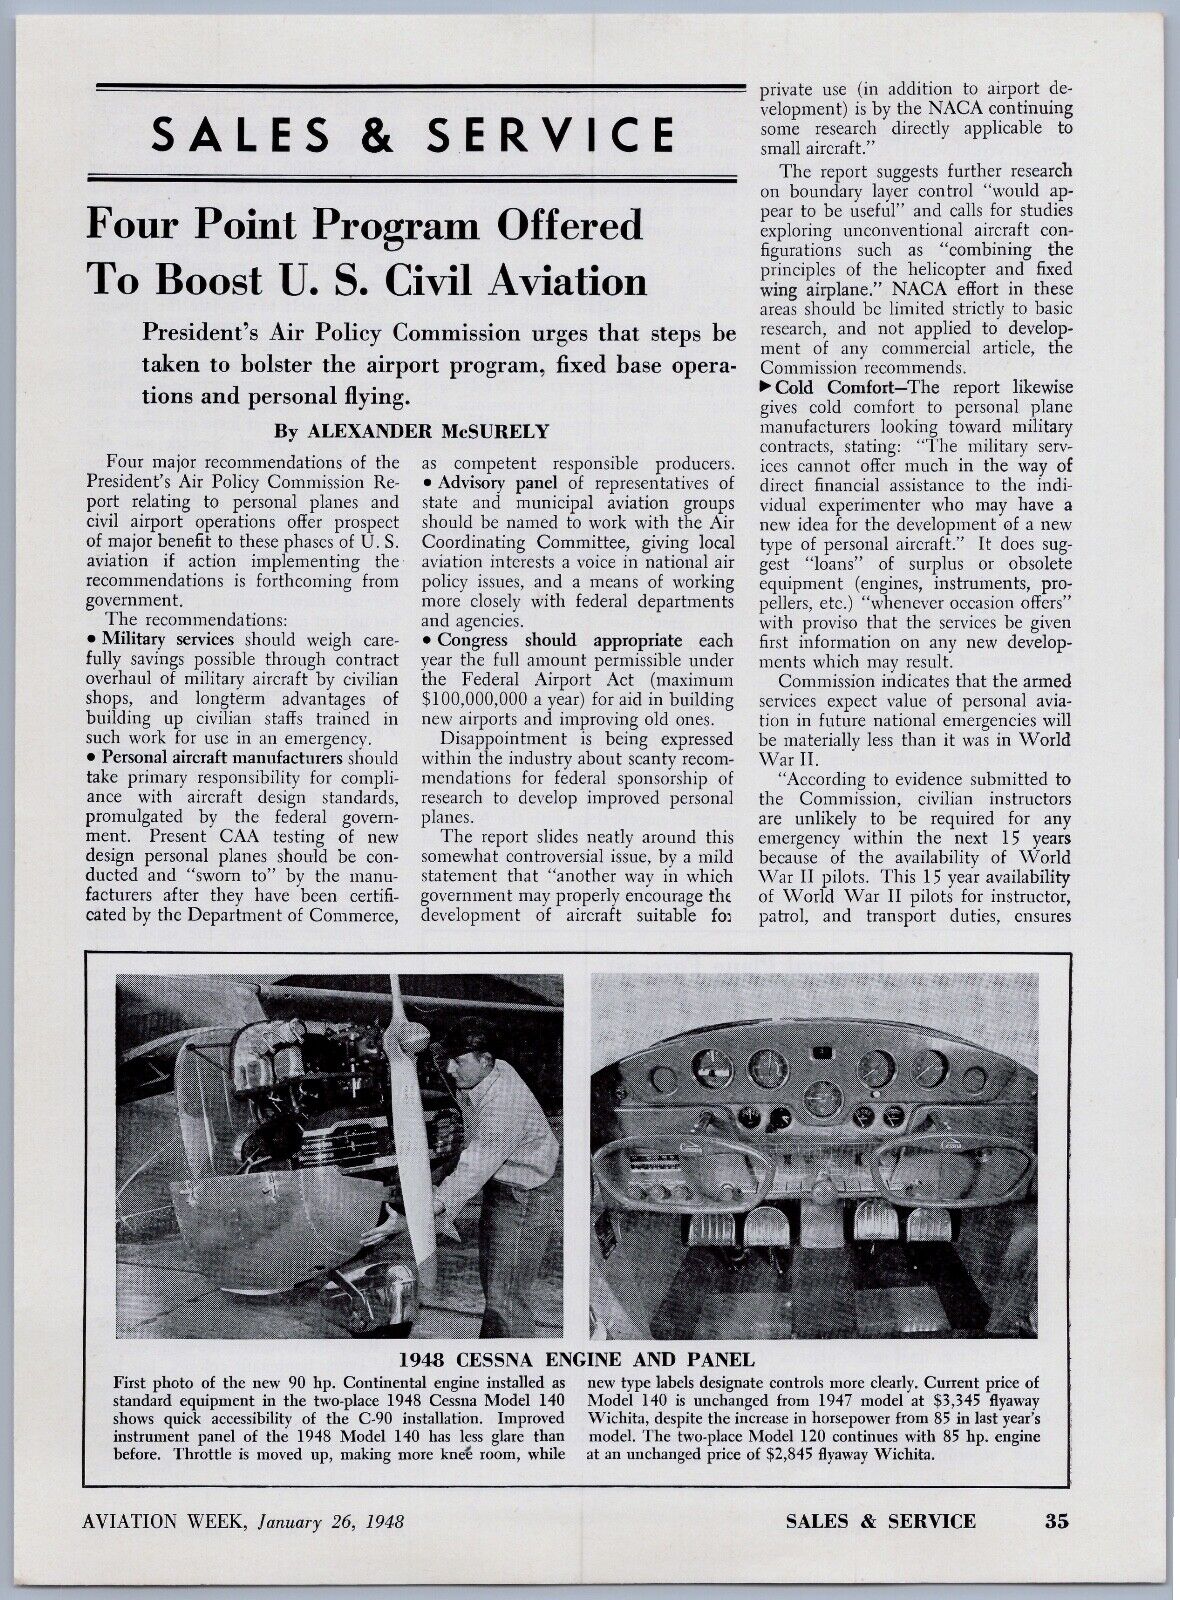 1948 Aviation Article - New Cessna Model 140 Continental Engine & Control Panel